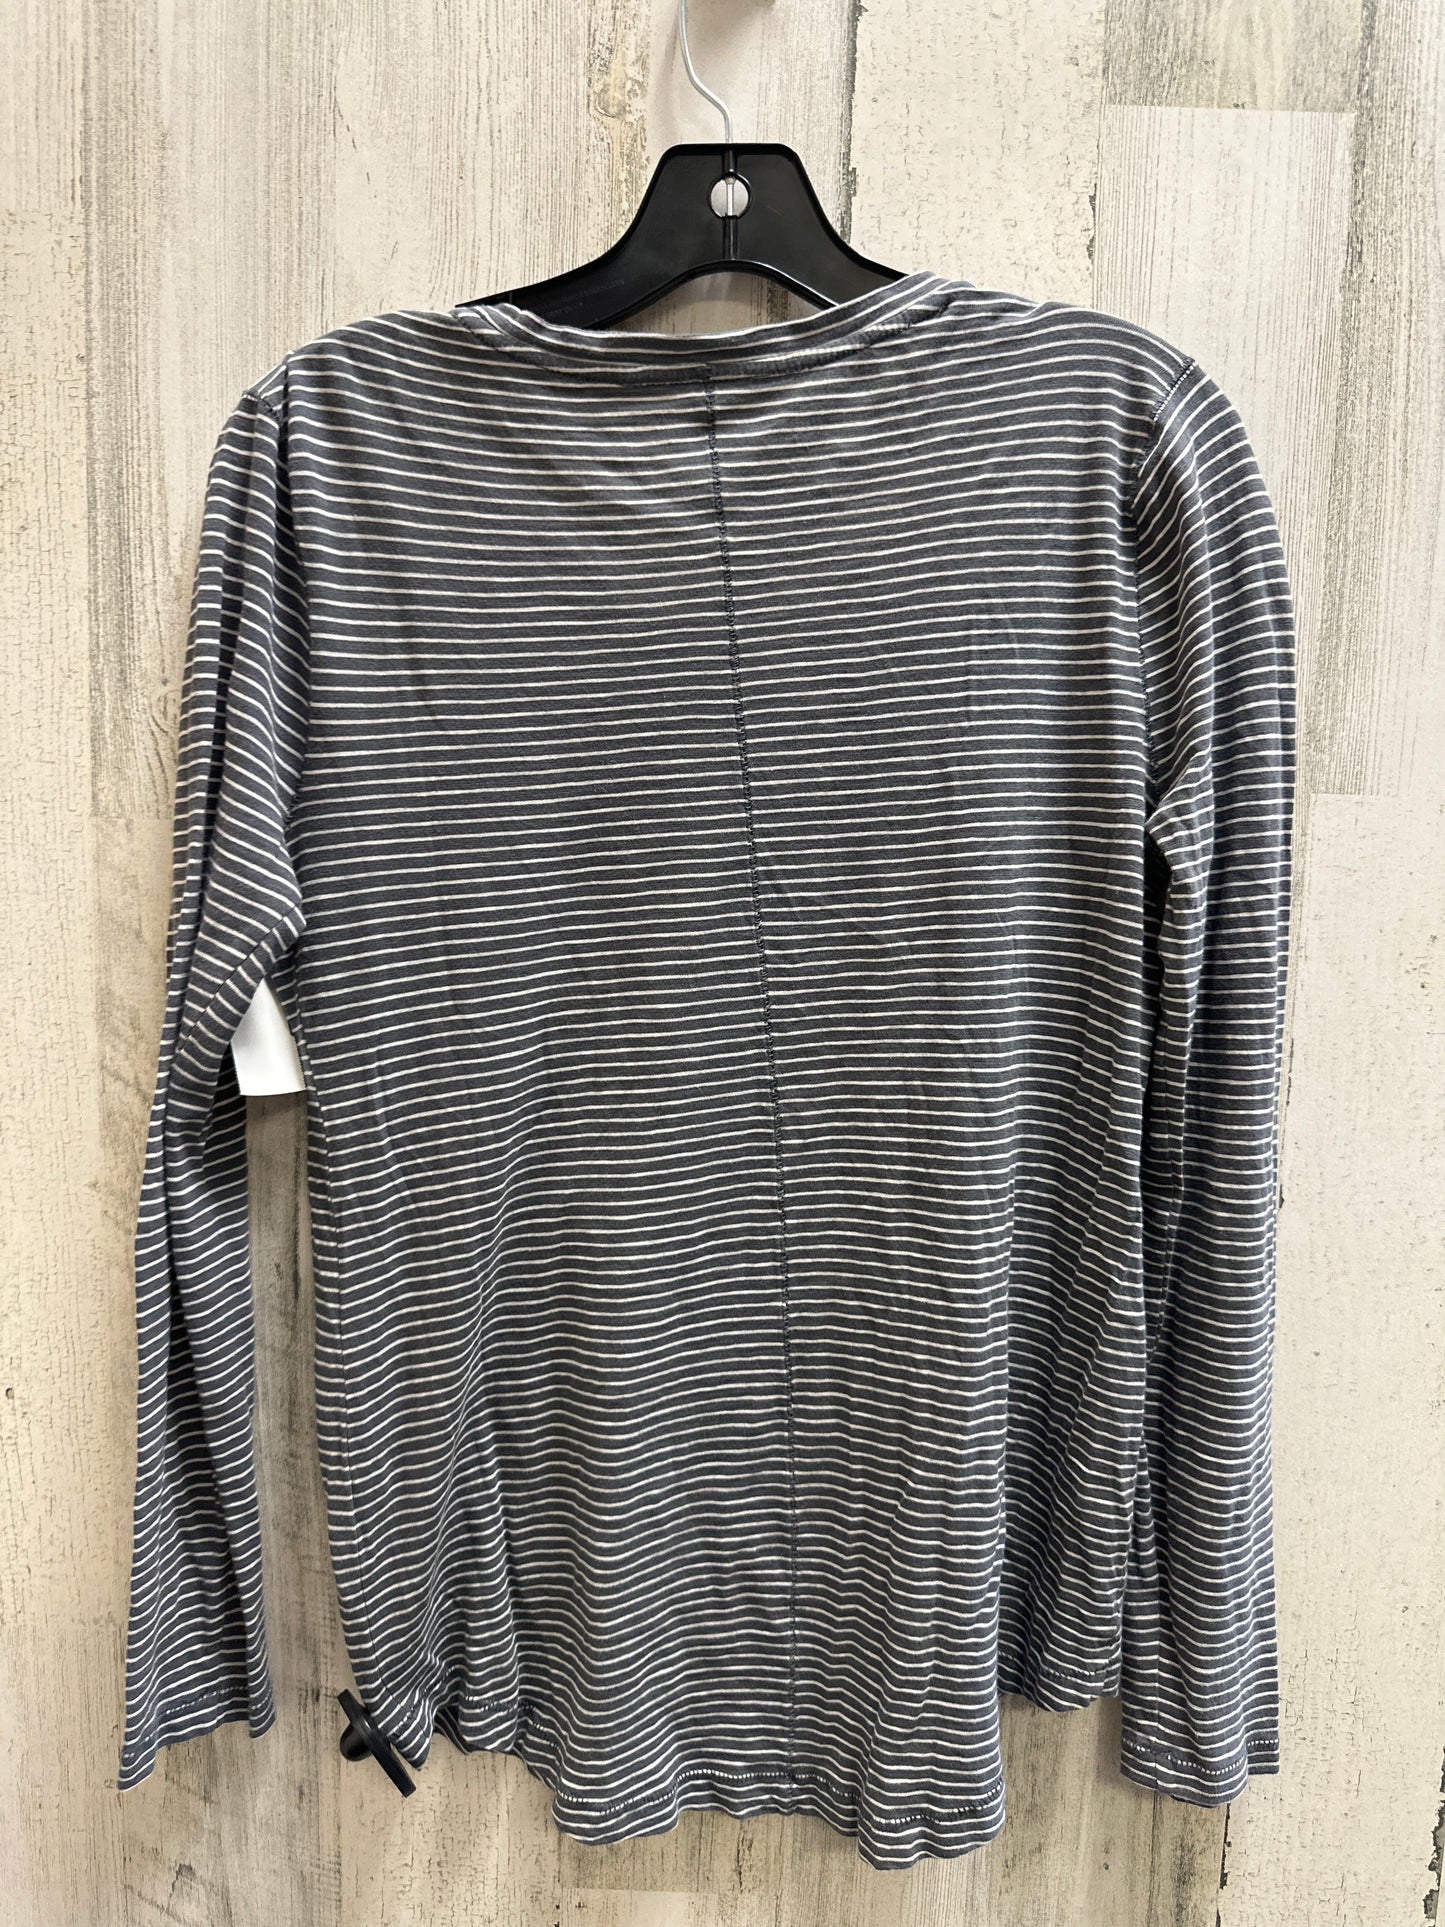 Grey & White Top Long Sleeve Madewell, Size S